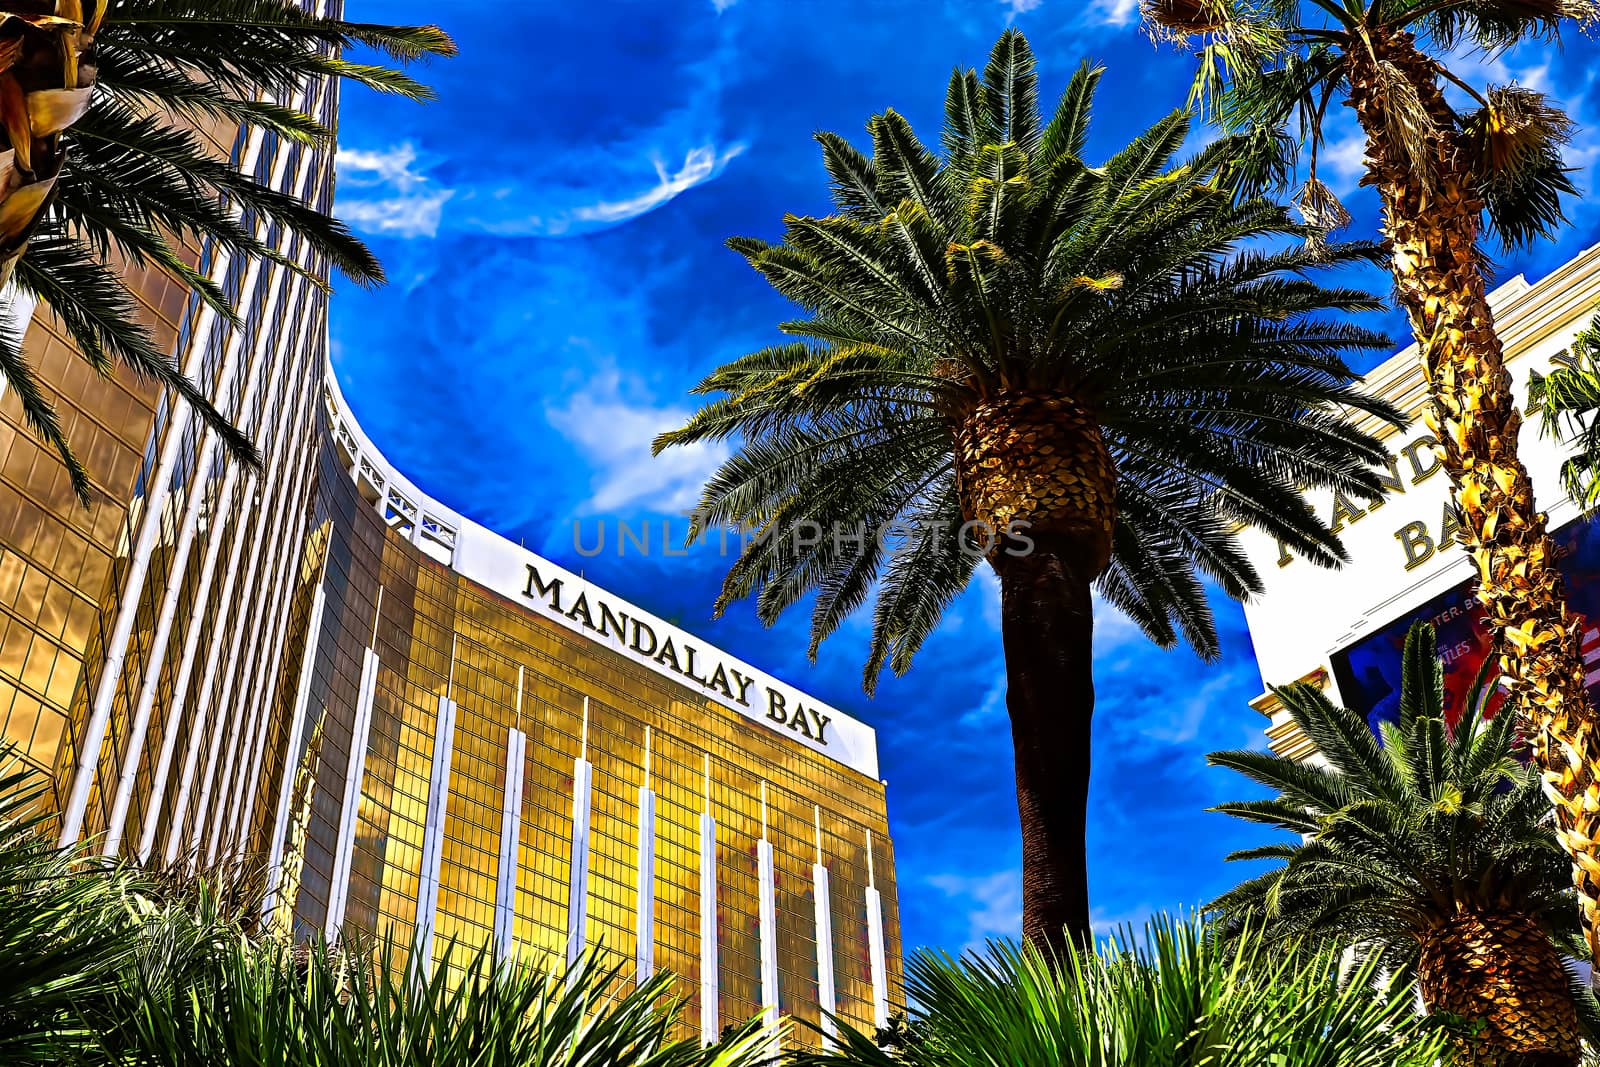 Las Vegas, NV/USA - Sep 15, 2018; Enormous Mandalay Bay Hotel Resort and Casino Las Vegas with beautifully landscaped entrance to modern architectural gold glass facade of building. by USA-TARO